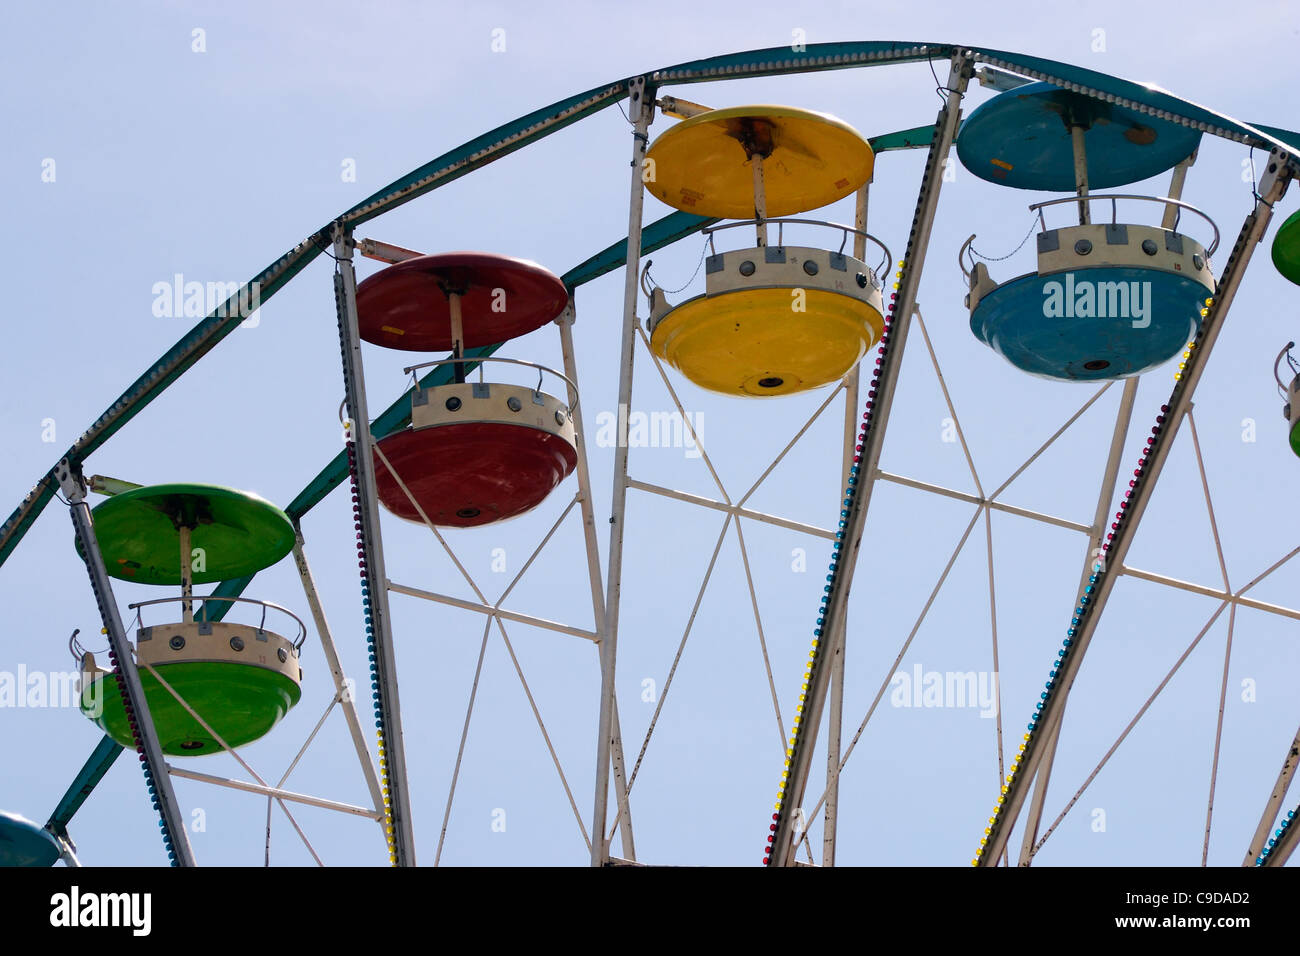 Colorful cars with canopies on a fairground ferris wheel ride. Stock Photo